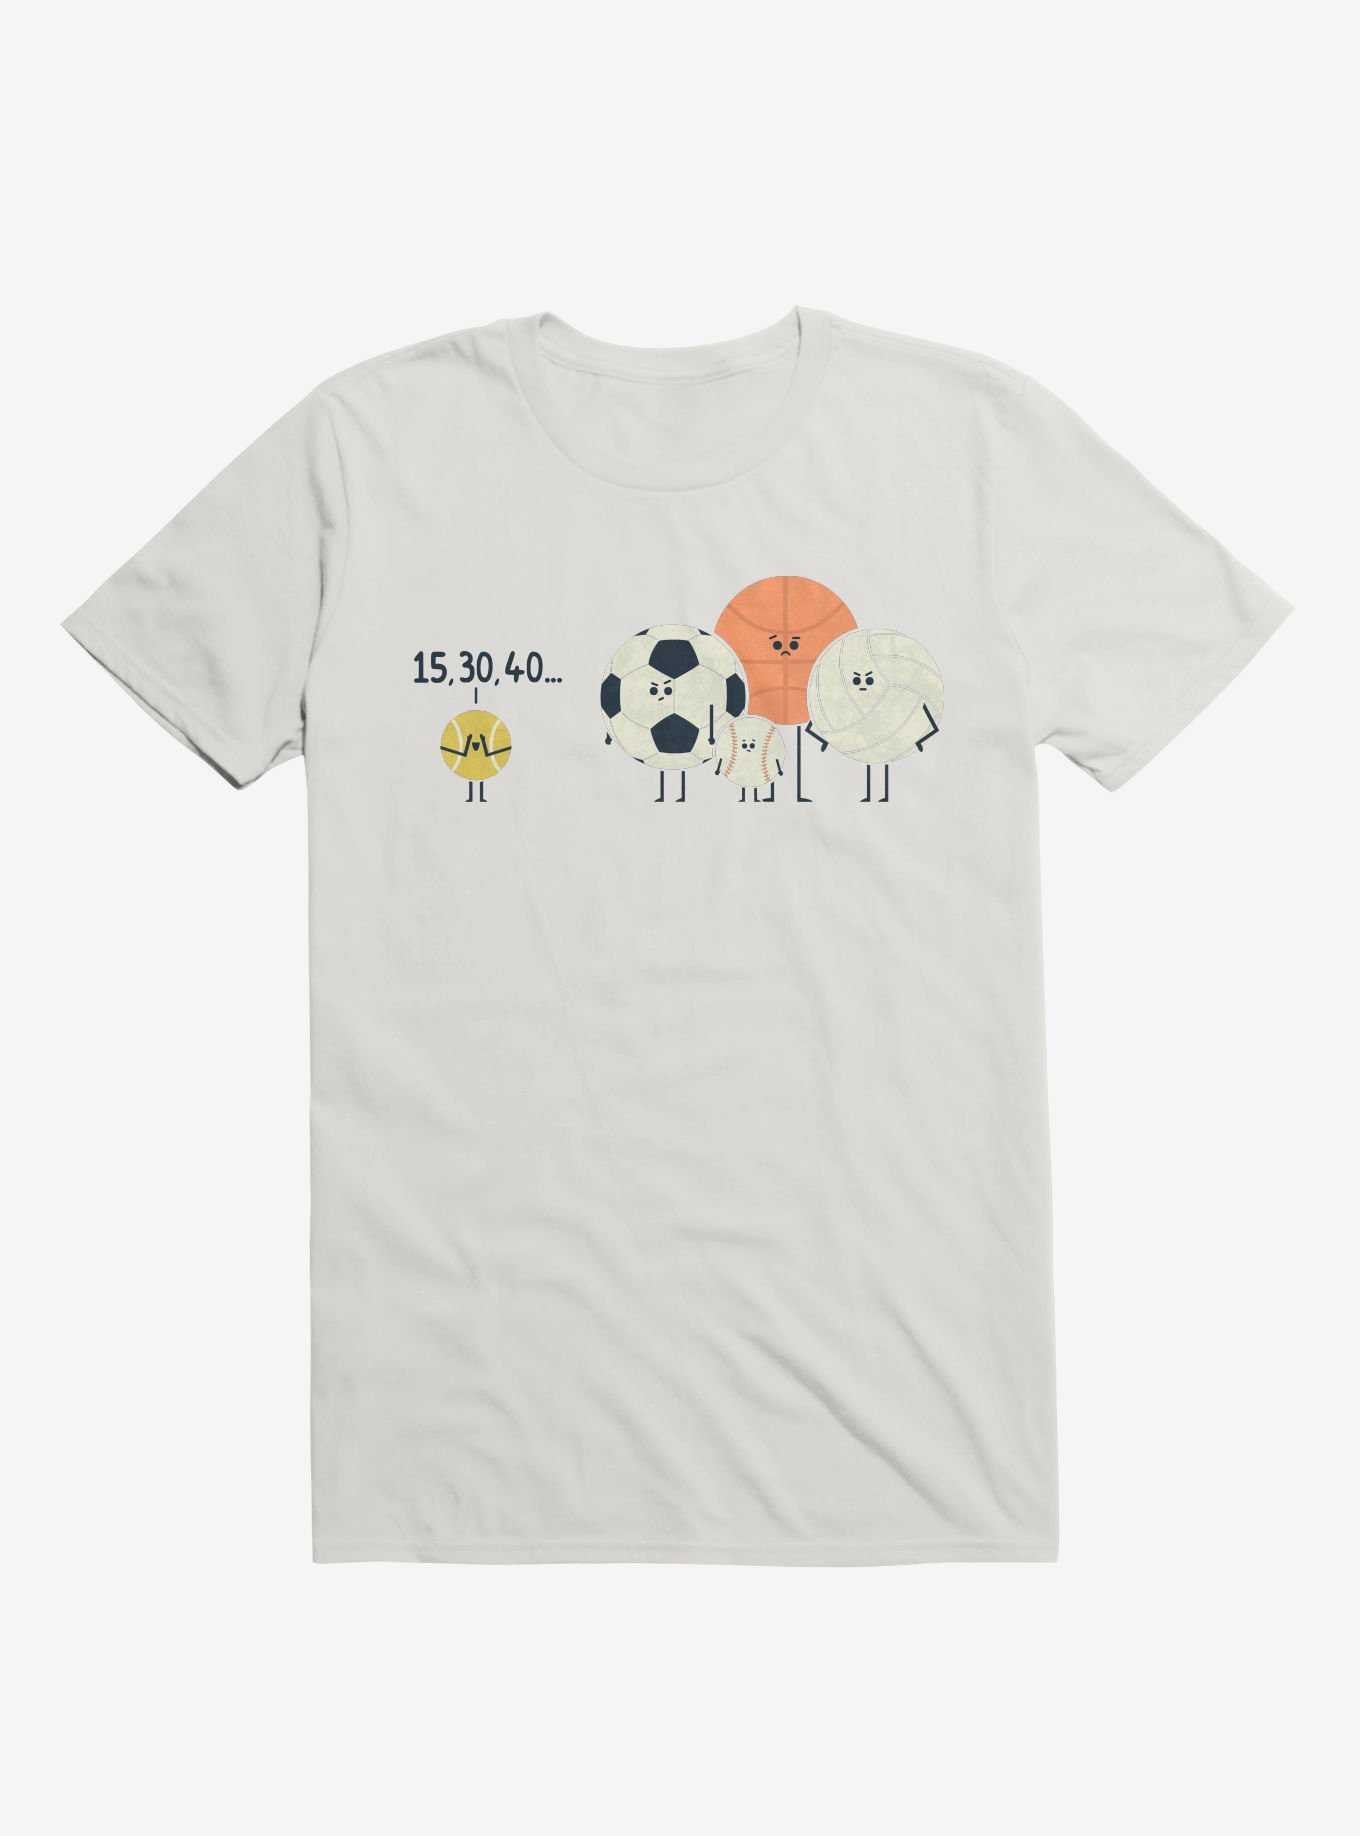 Sports Balls Playing Hide And Seek White T-Shirt, , hi-res